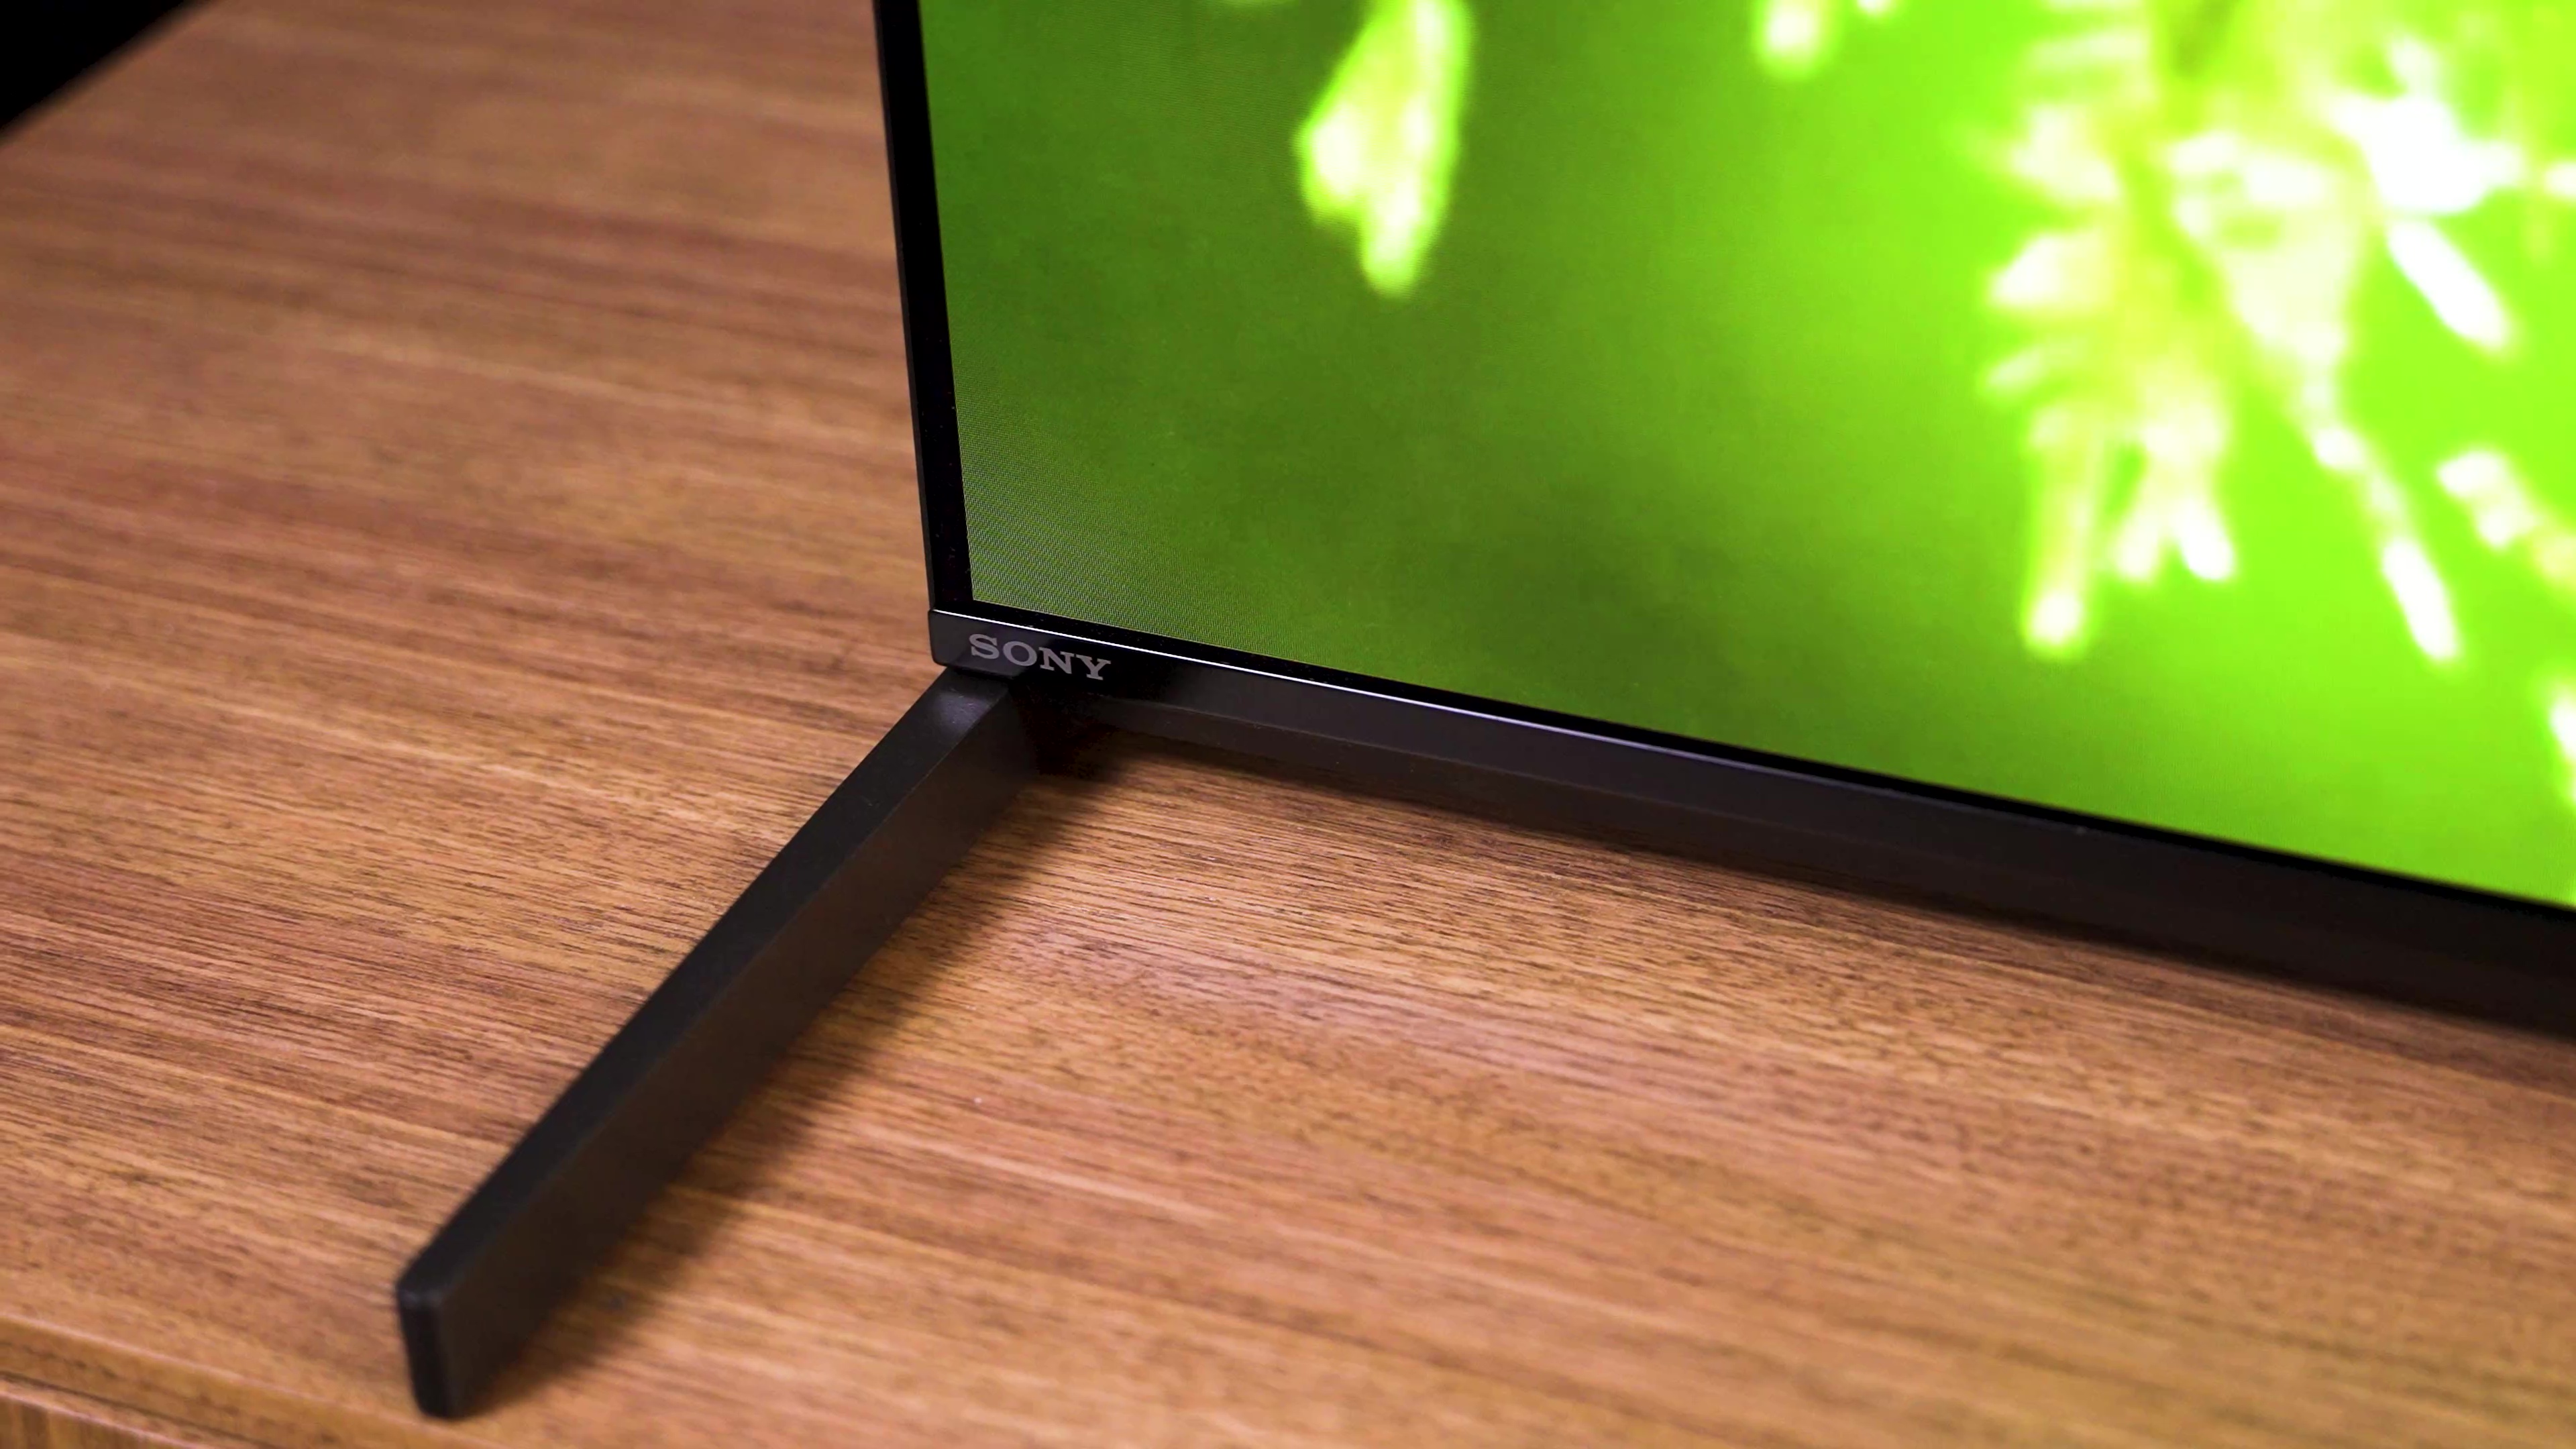 Sony once again won't have any new televisions at CES